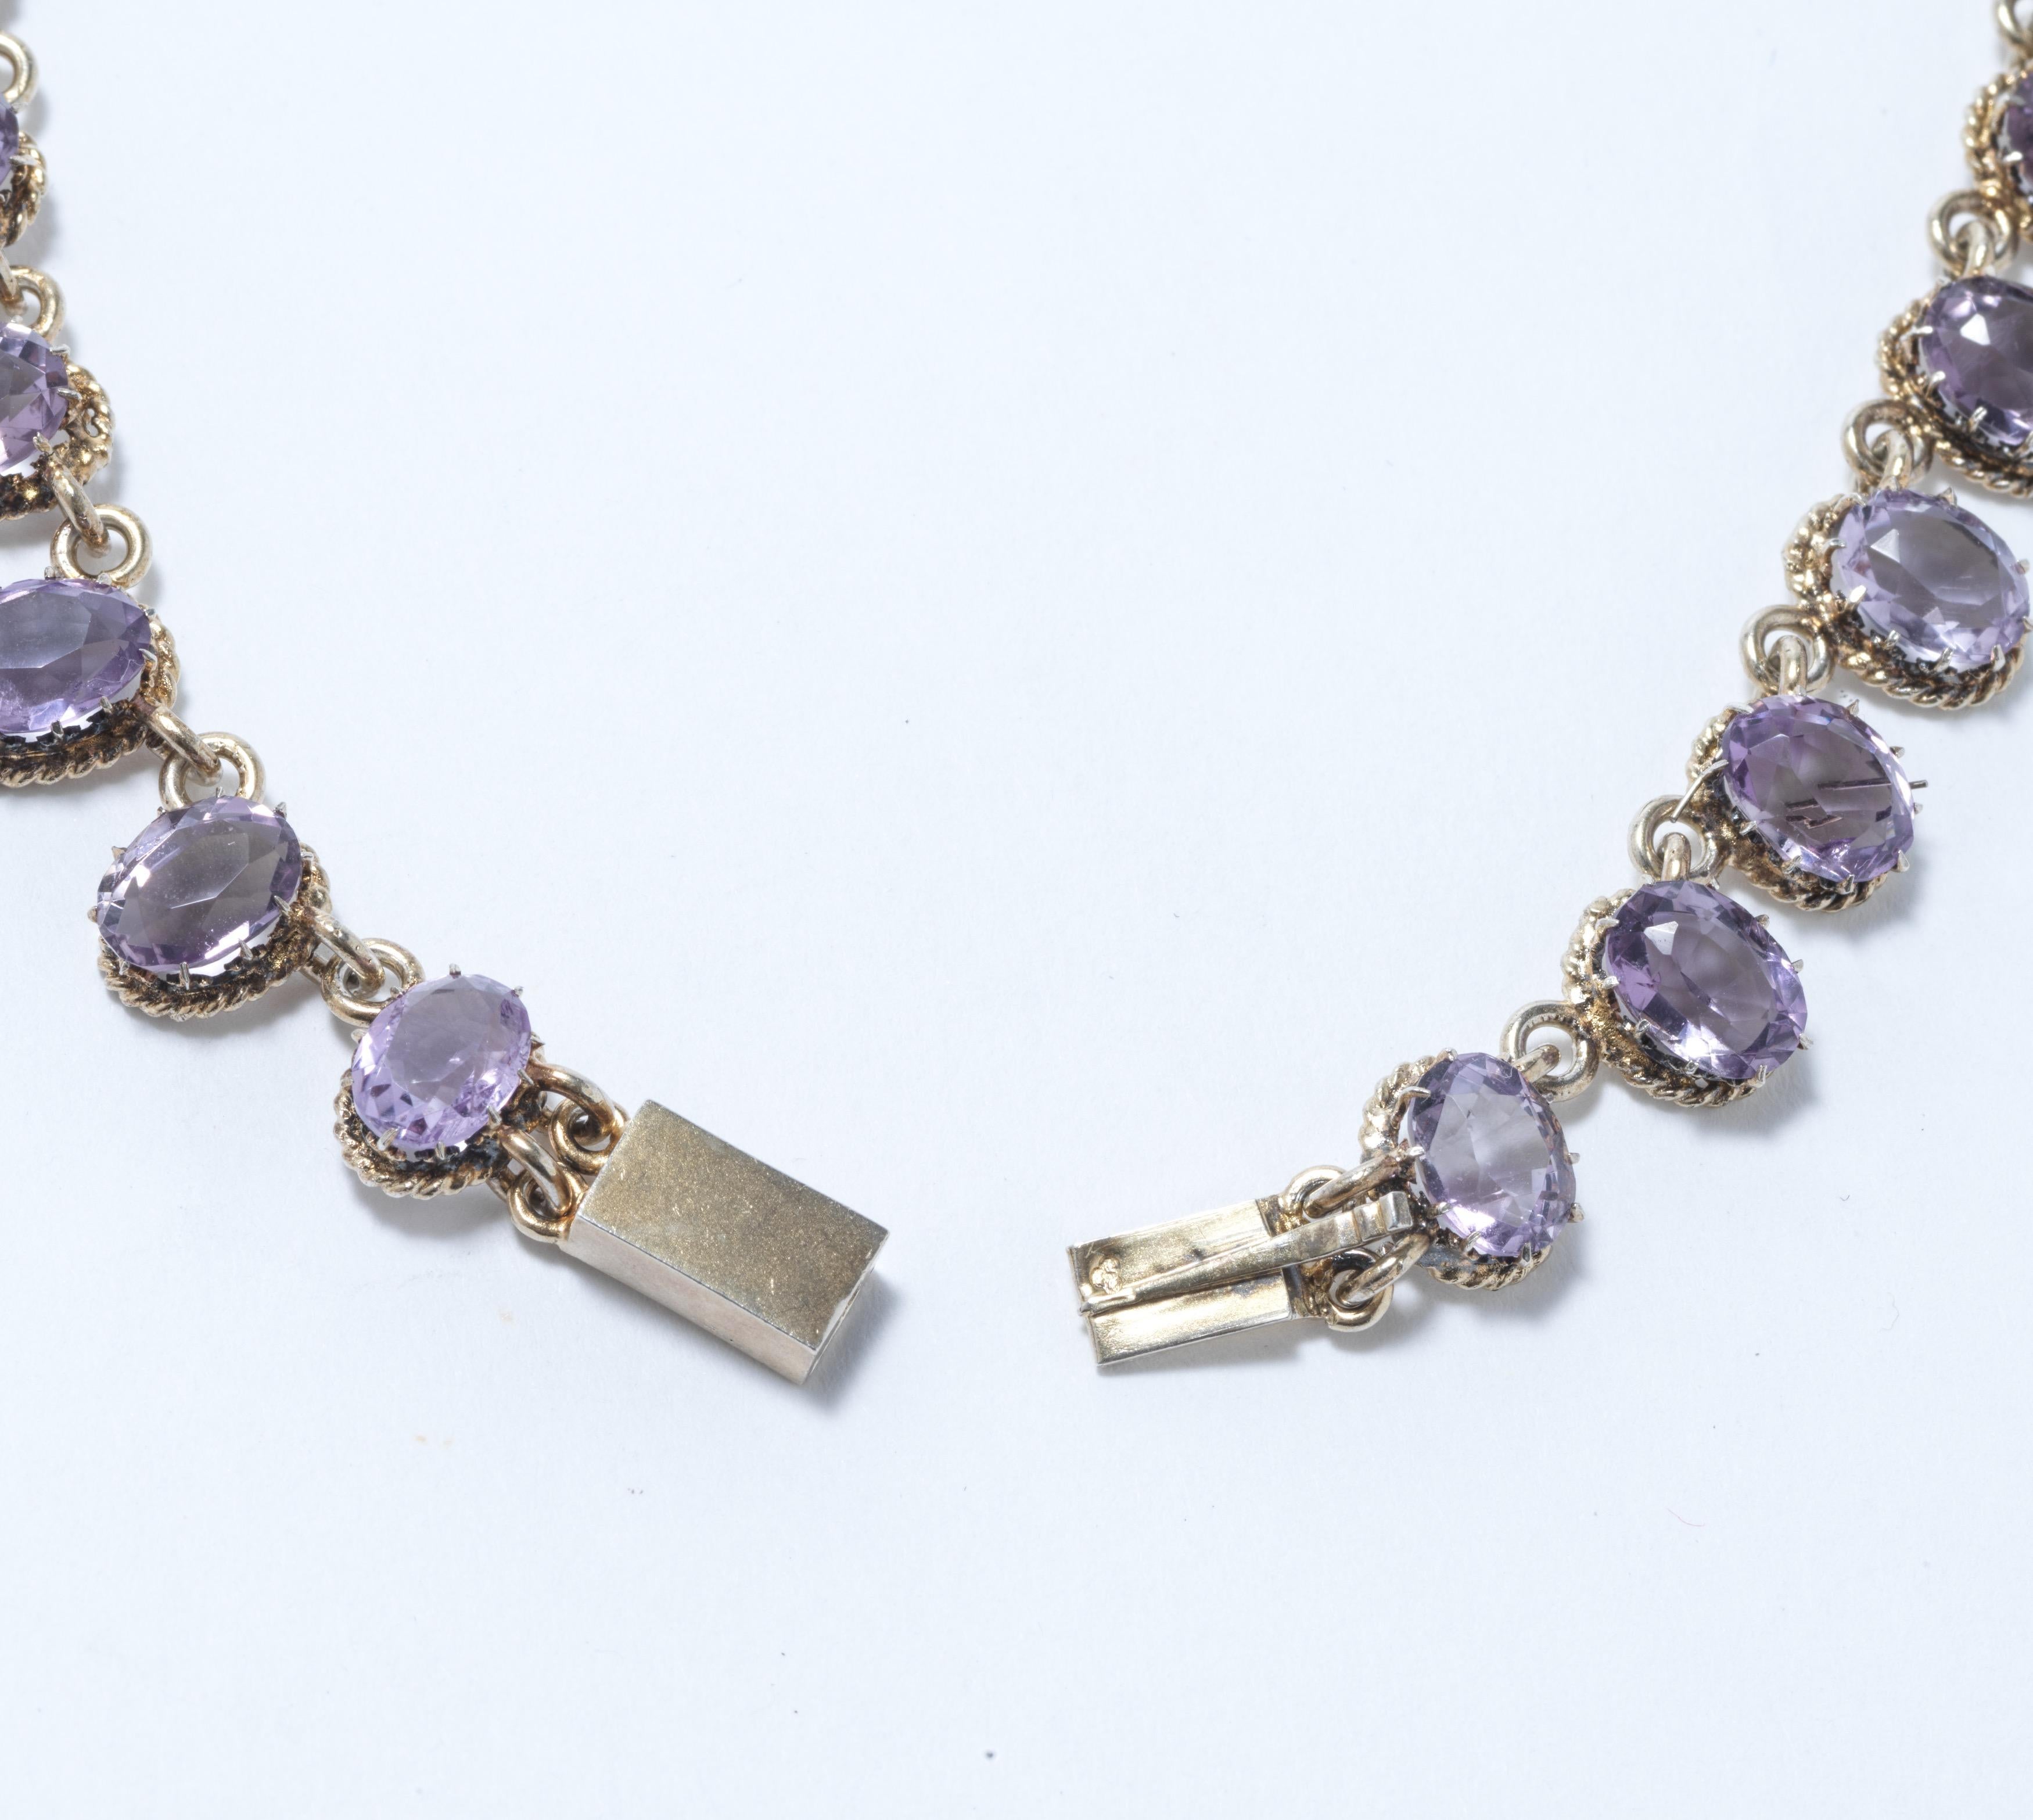 Antique necklace. Gilt silver with amethysts. 19th c For Sale 3